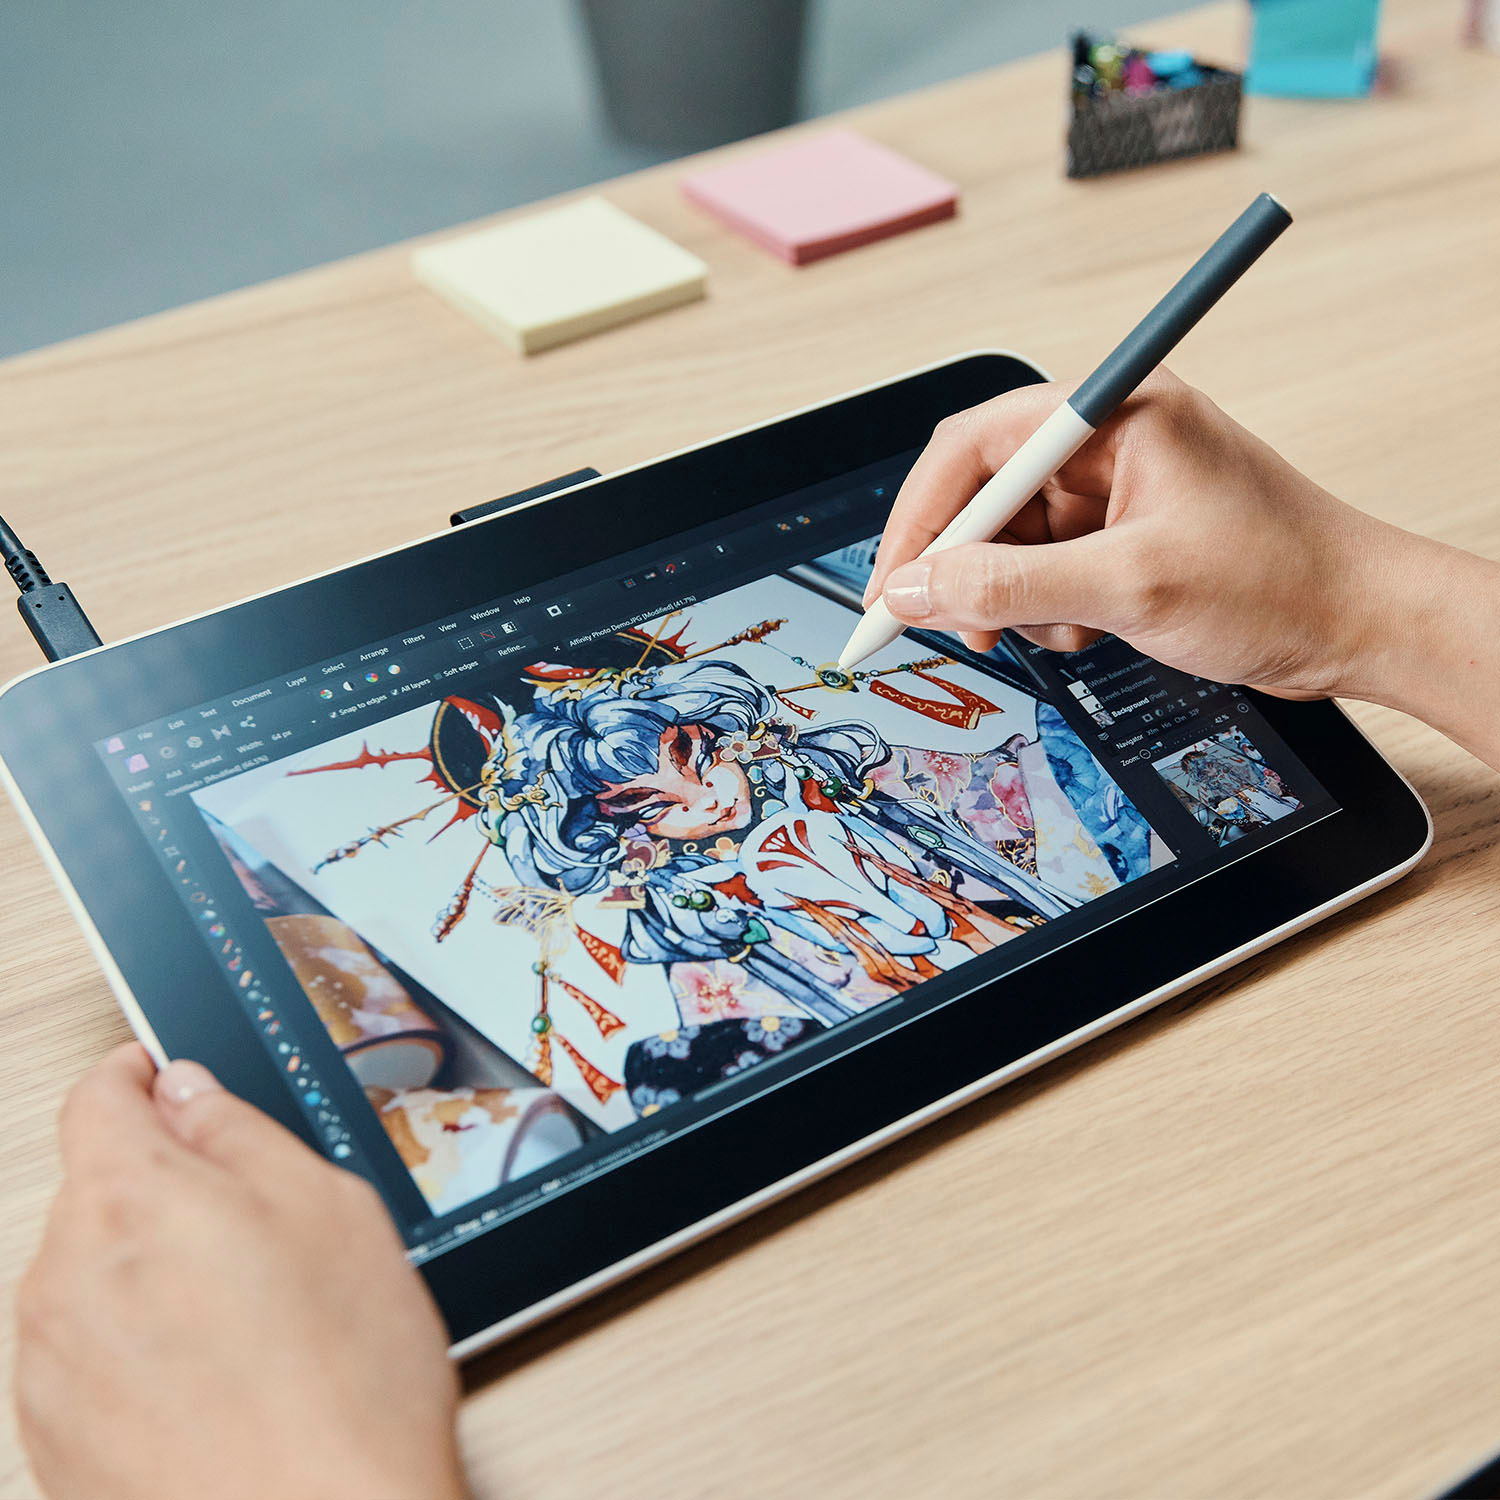 Wacom One 13 Touch (2023 version) 13.3